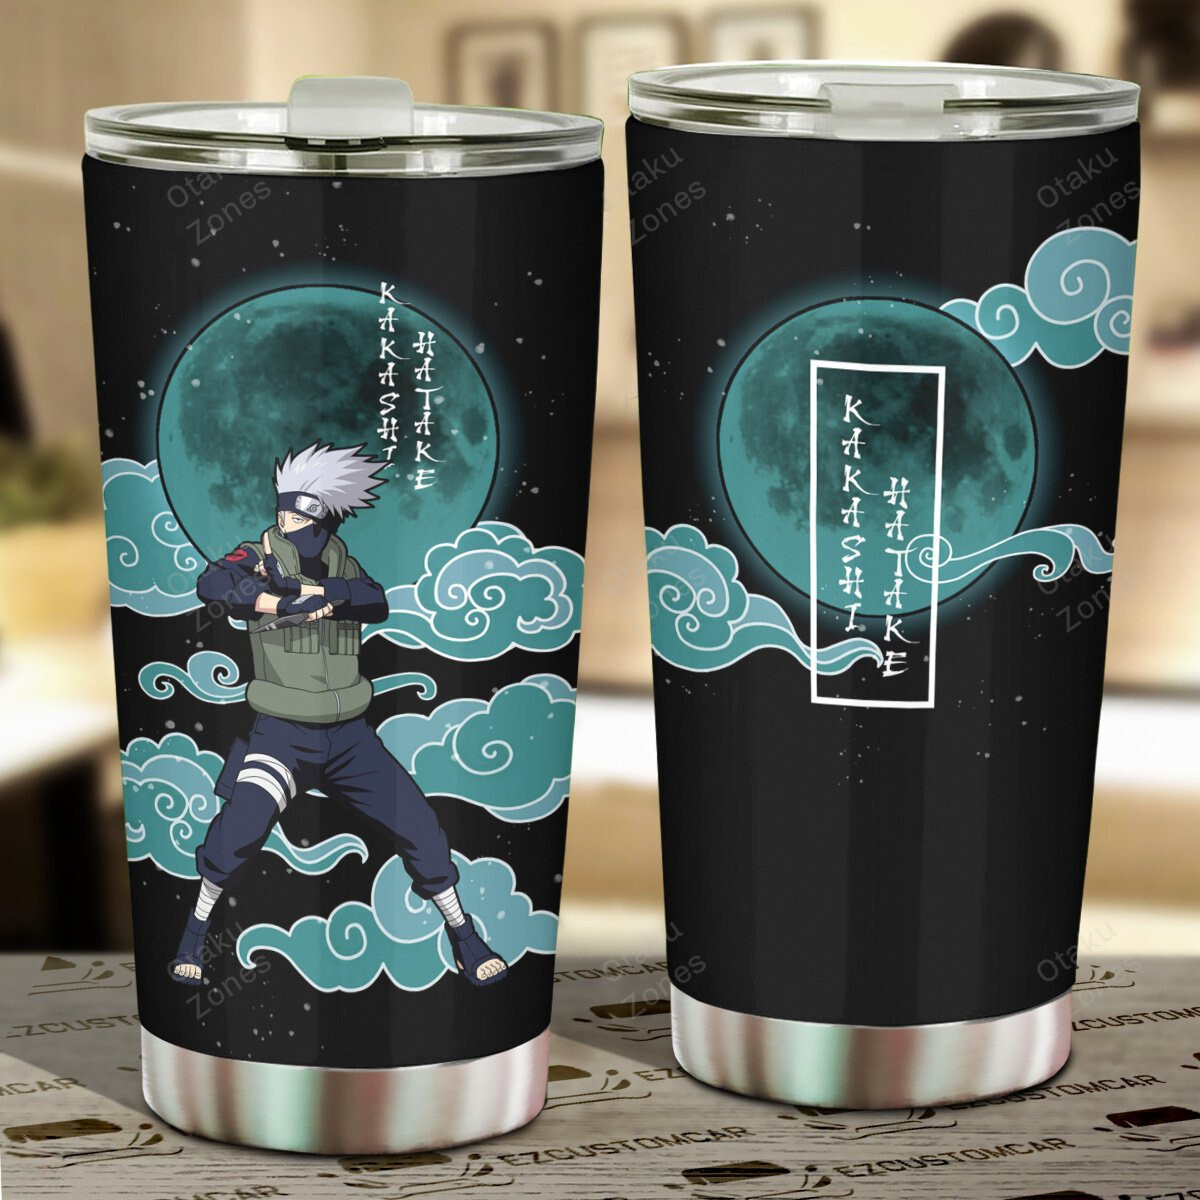 Go ahead and order your new tumbler now! 28